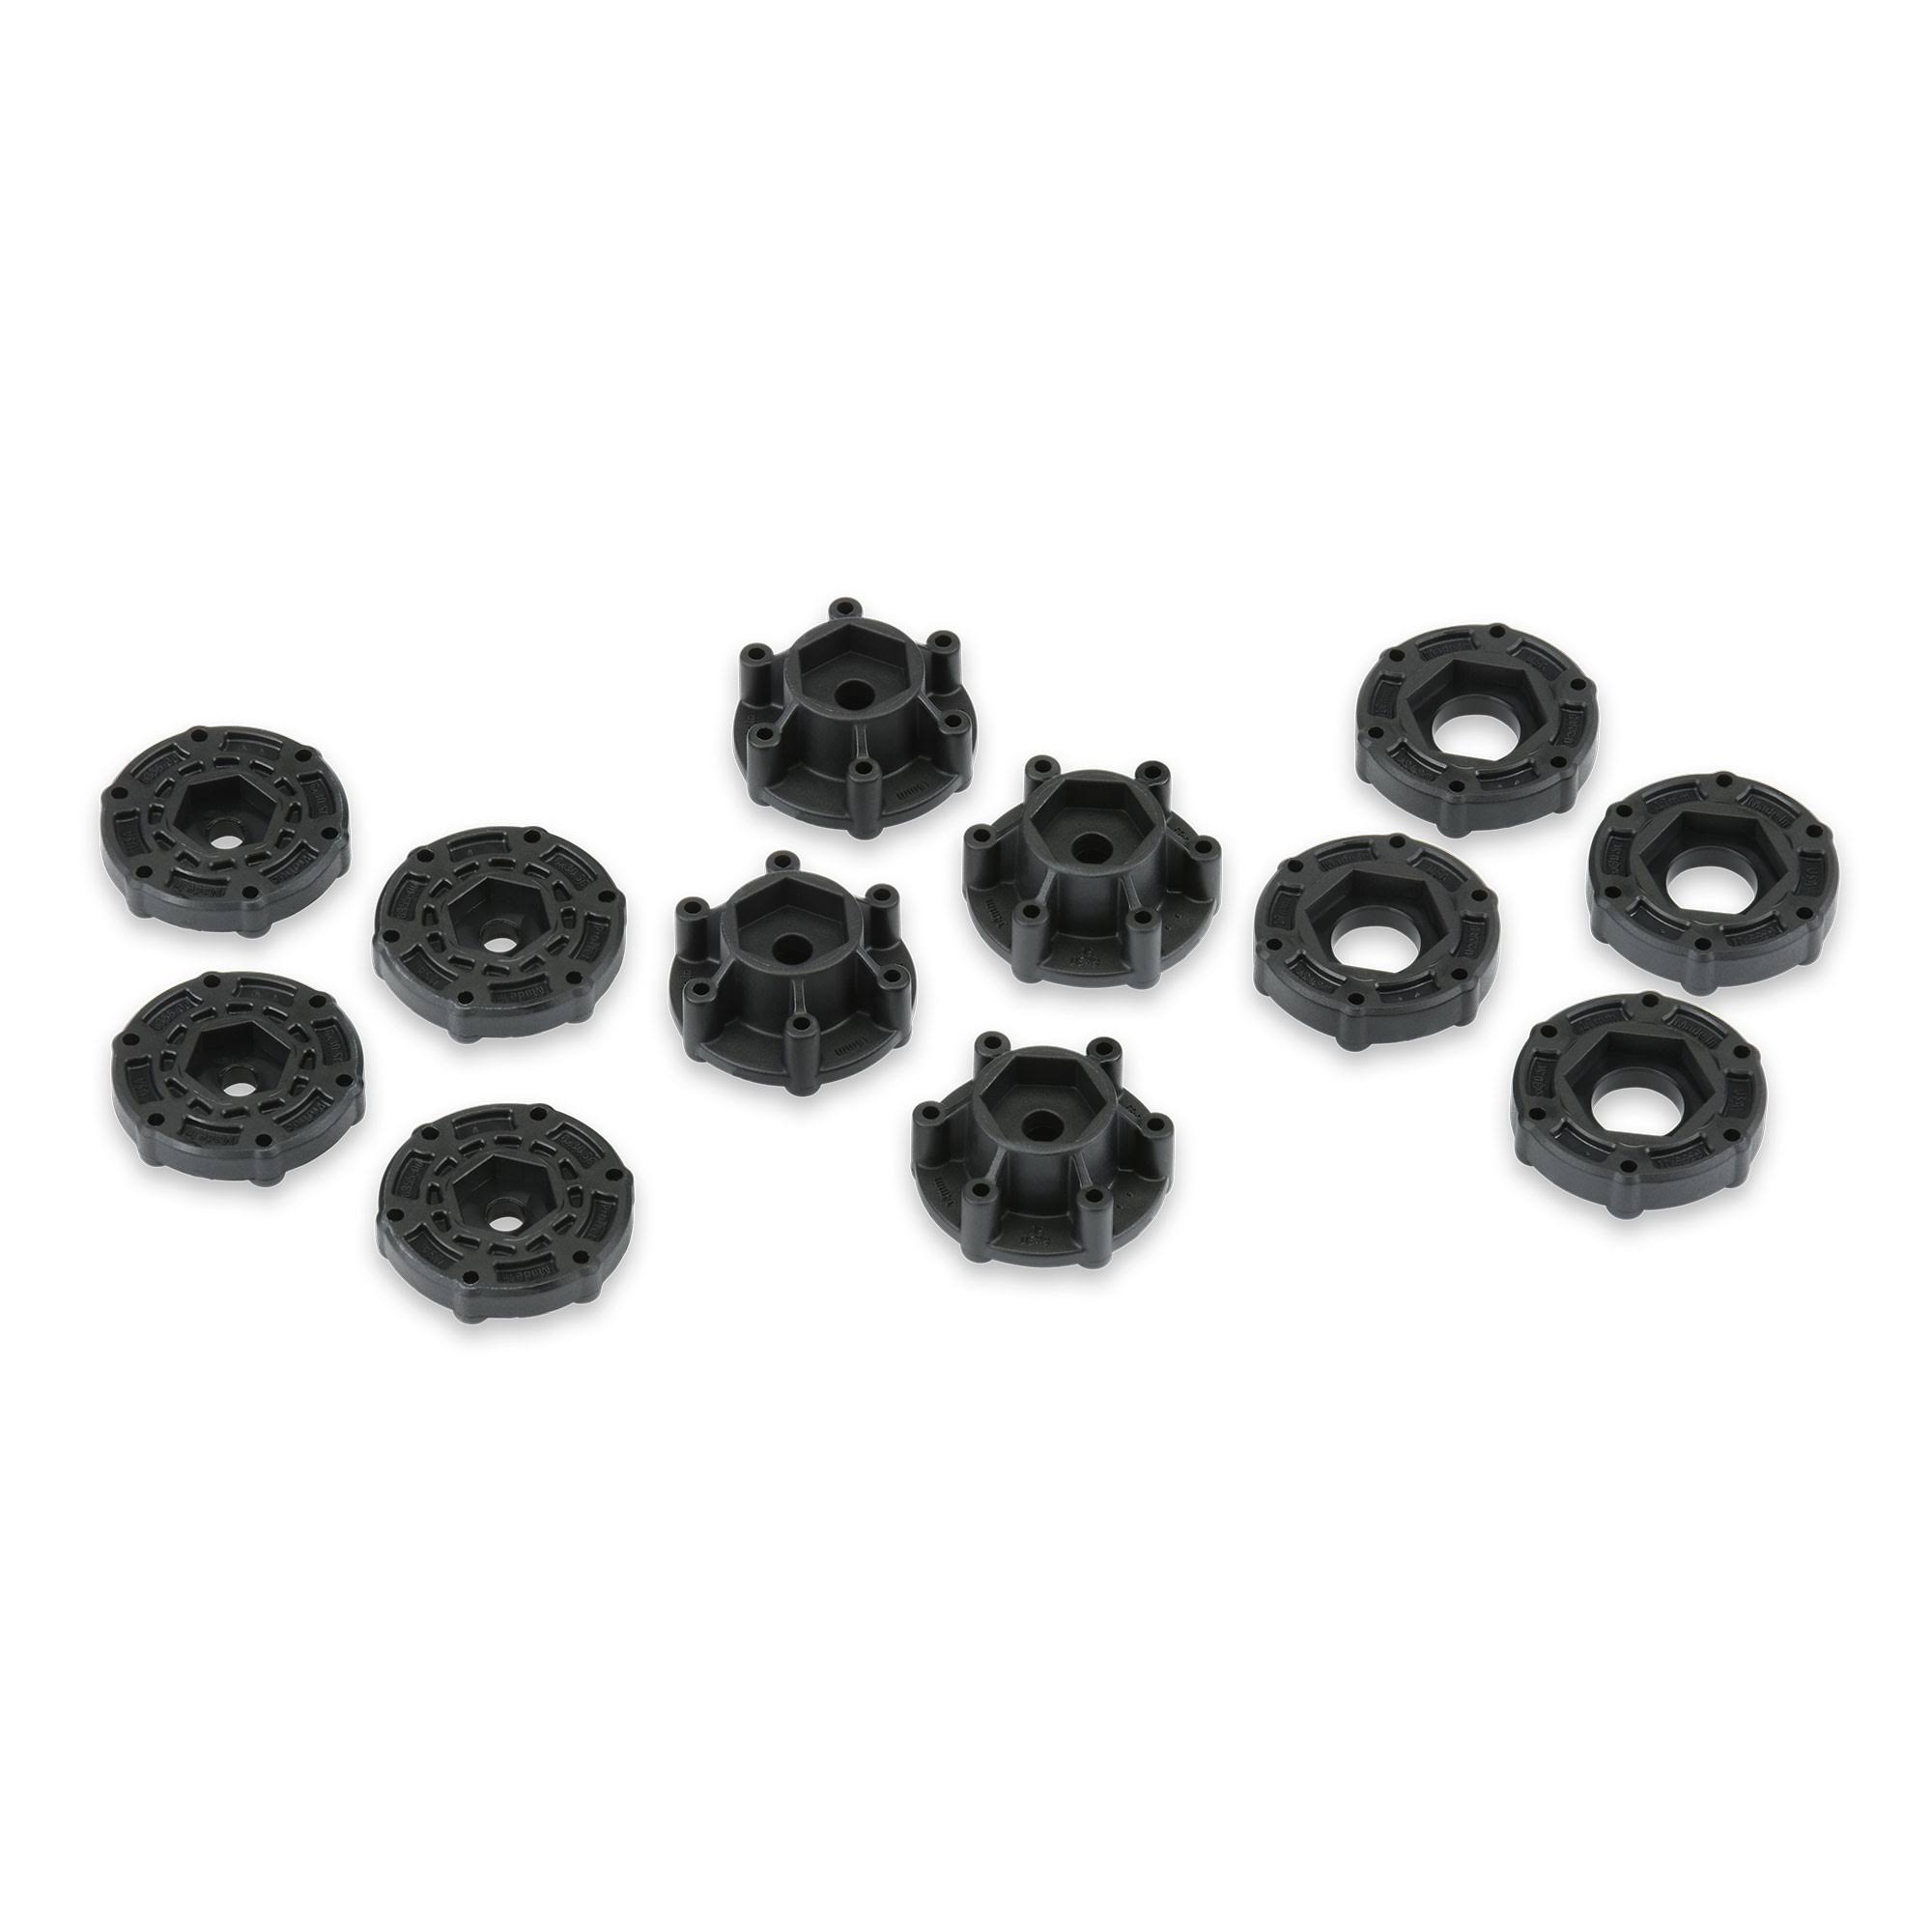 Pro-Line 6355-00 - 6x30 to 12mm ProTrac SC Hex Adapters 6x30 SC Wheels